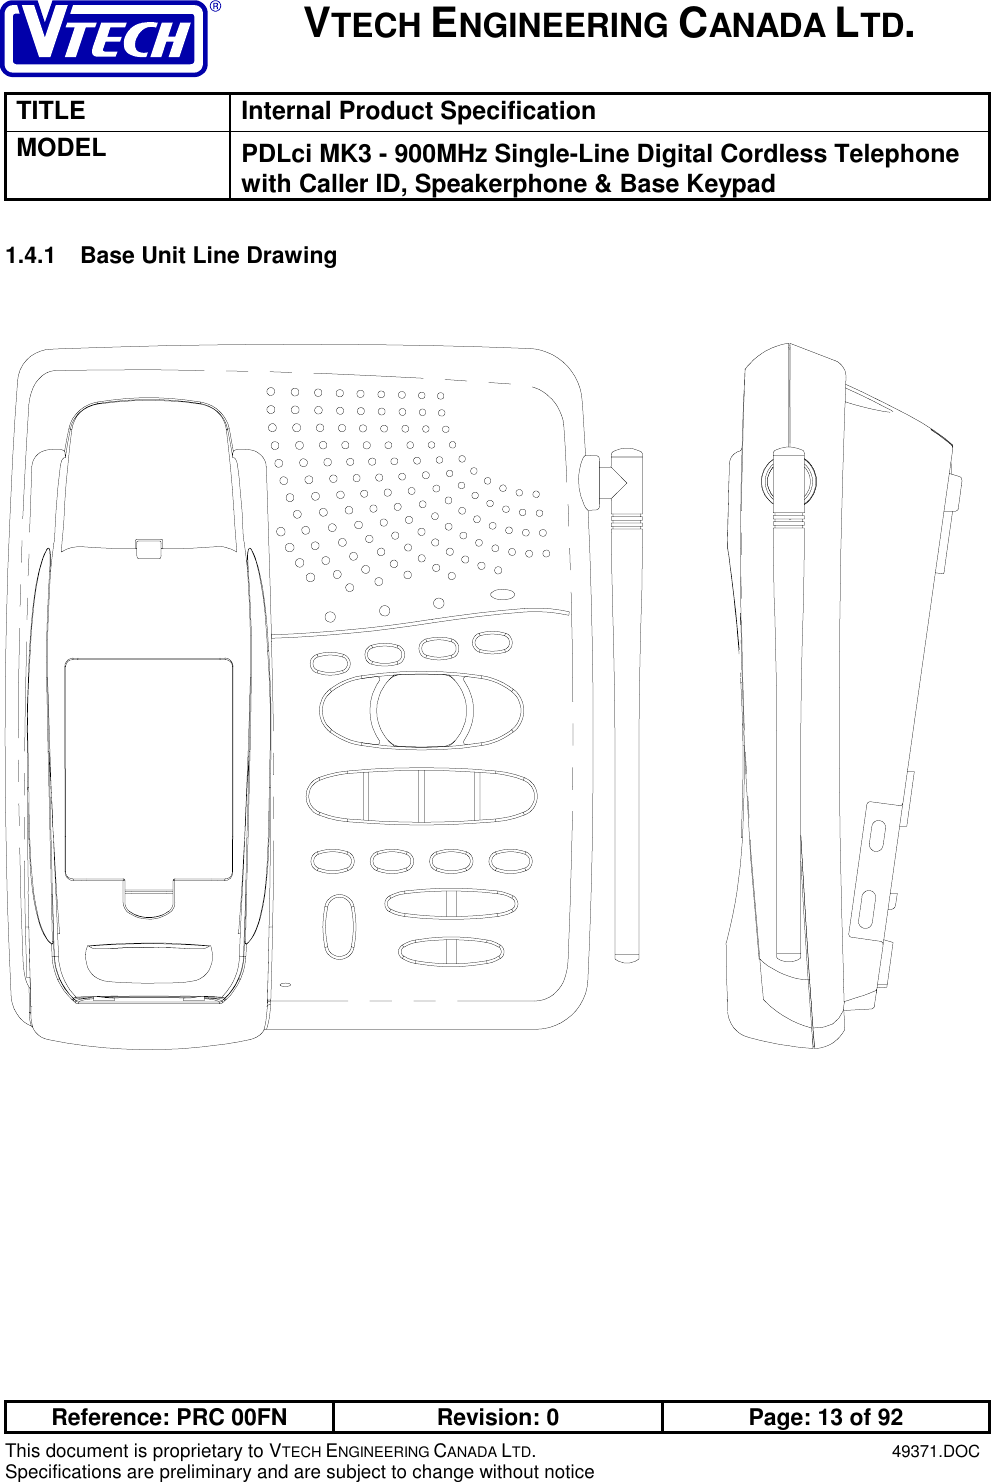 VTECH ENGINEERING CANADA LTD.TITLE Internal Product SpecificationMODEL PDLci MK3 - 900MHz Single-Line Digital Cordless Telephonewith Caller ID, Speakerphone &amp; Base KeypadReference: PRC 00FN Revision: 0 Page: 13 of 92This document is proprietary to VTECH ENGINEERING CANADA LTD.49371.DOCSpecifications are preliminary and are subject to change without notice1.4.1  Base Unit Line Drawing